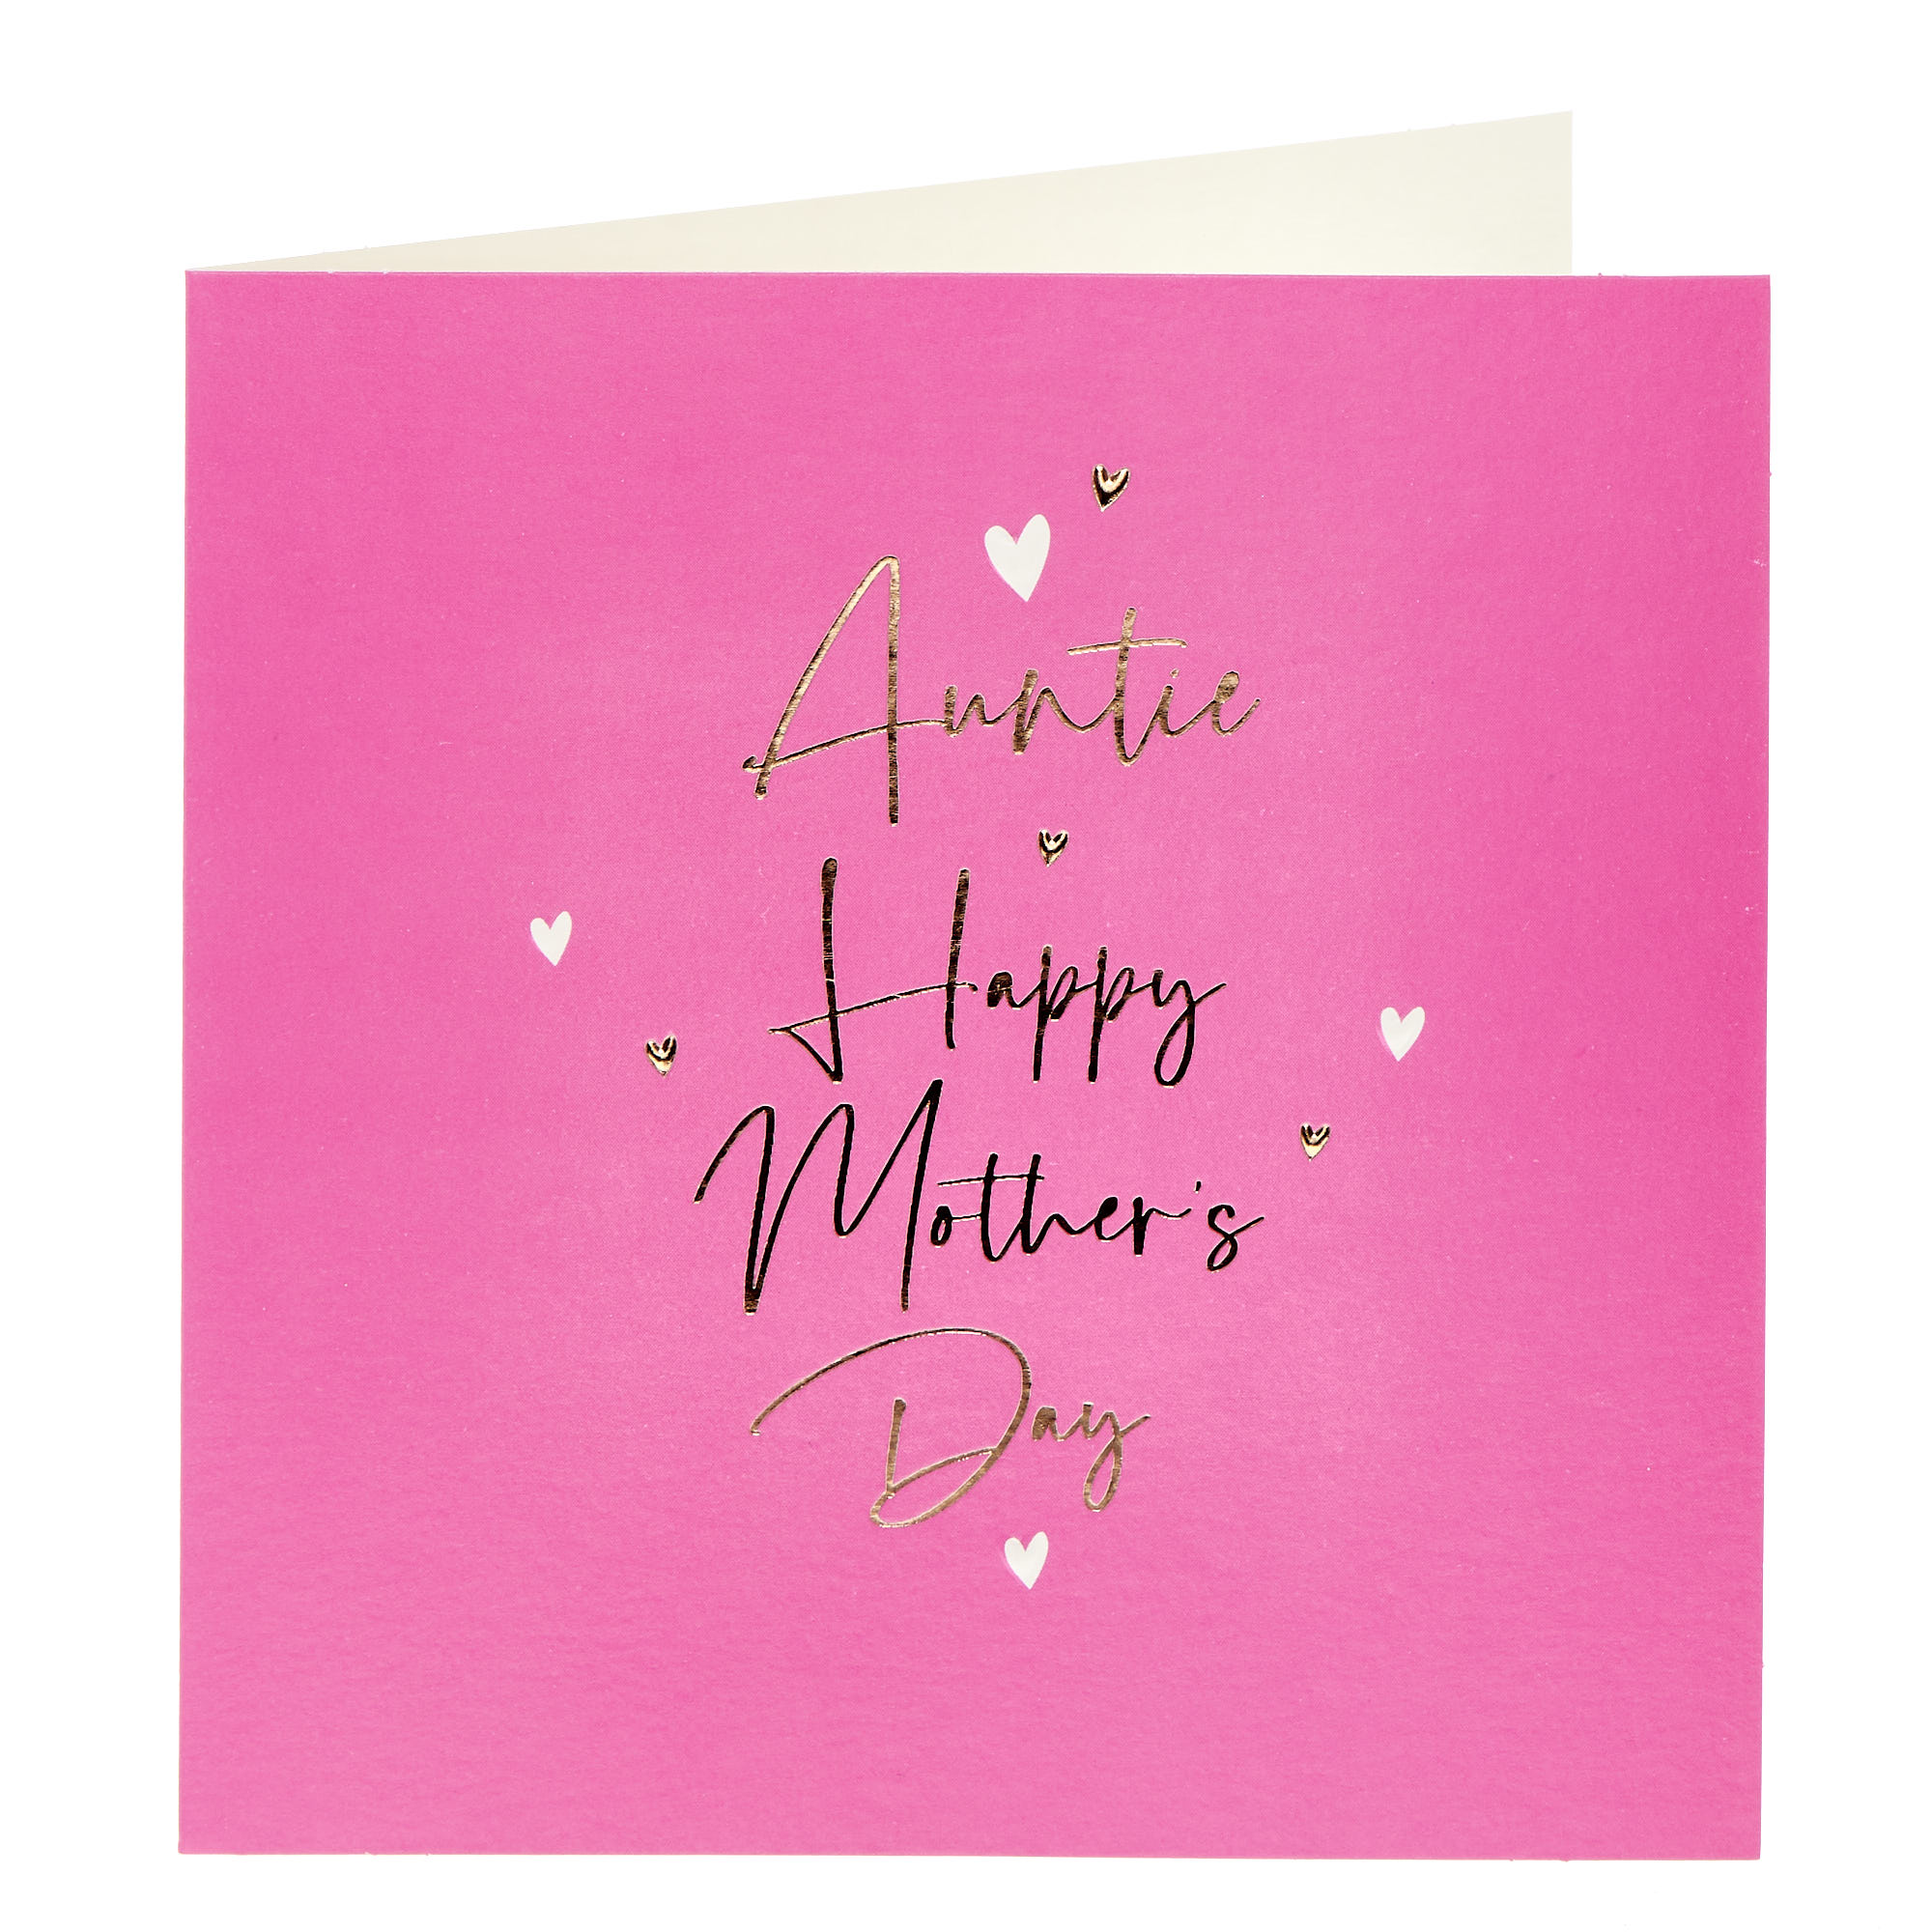 Auntie Mini Hearts Mother's Day Card